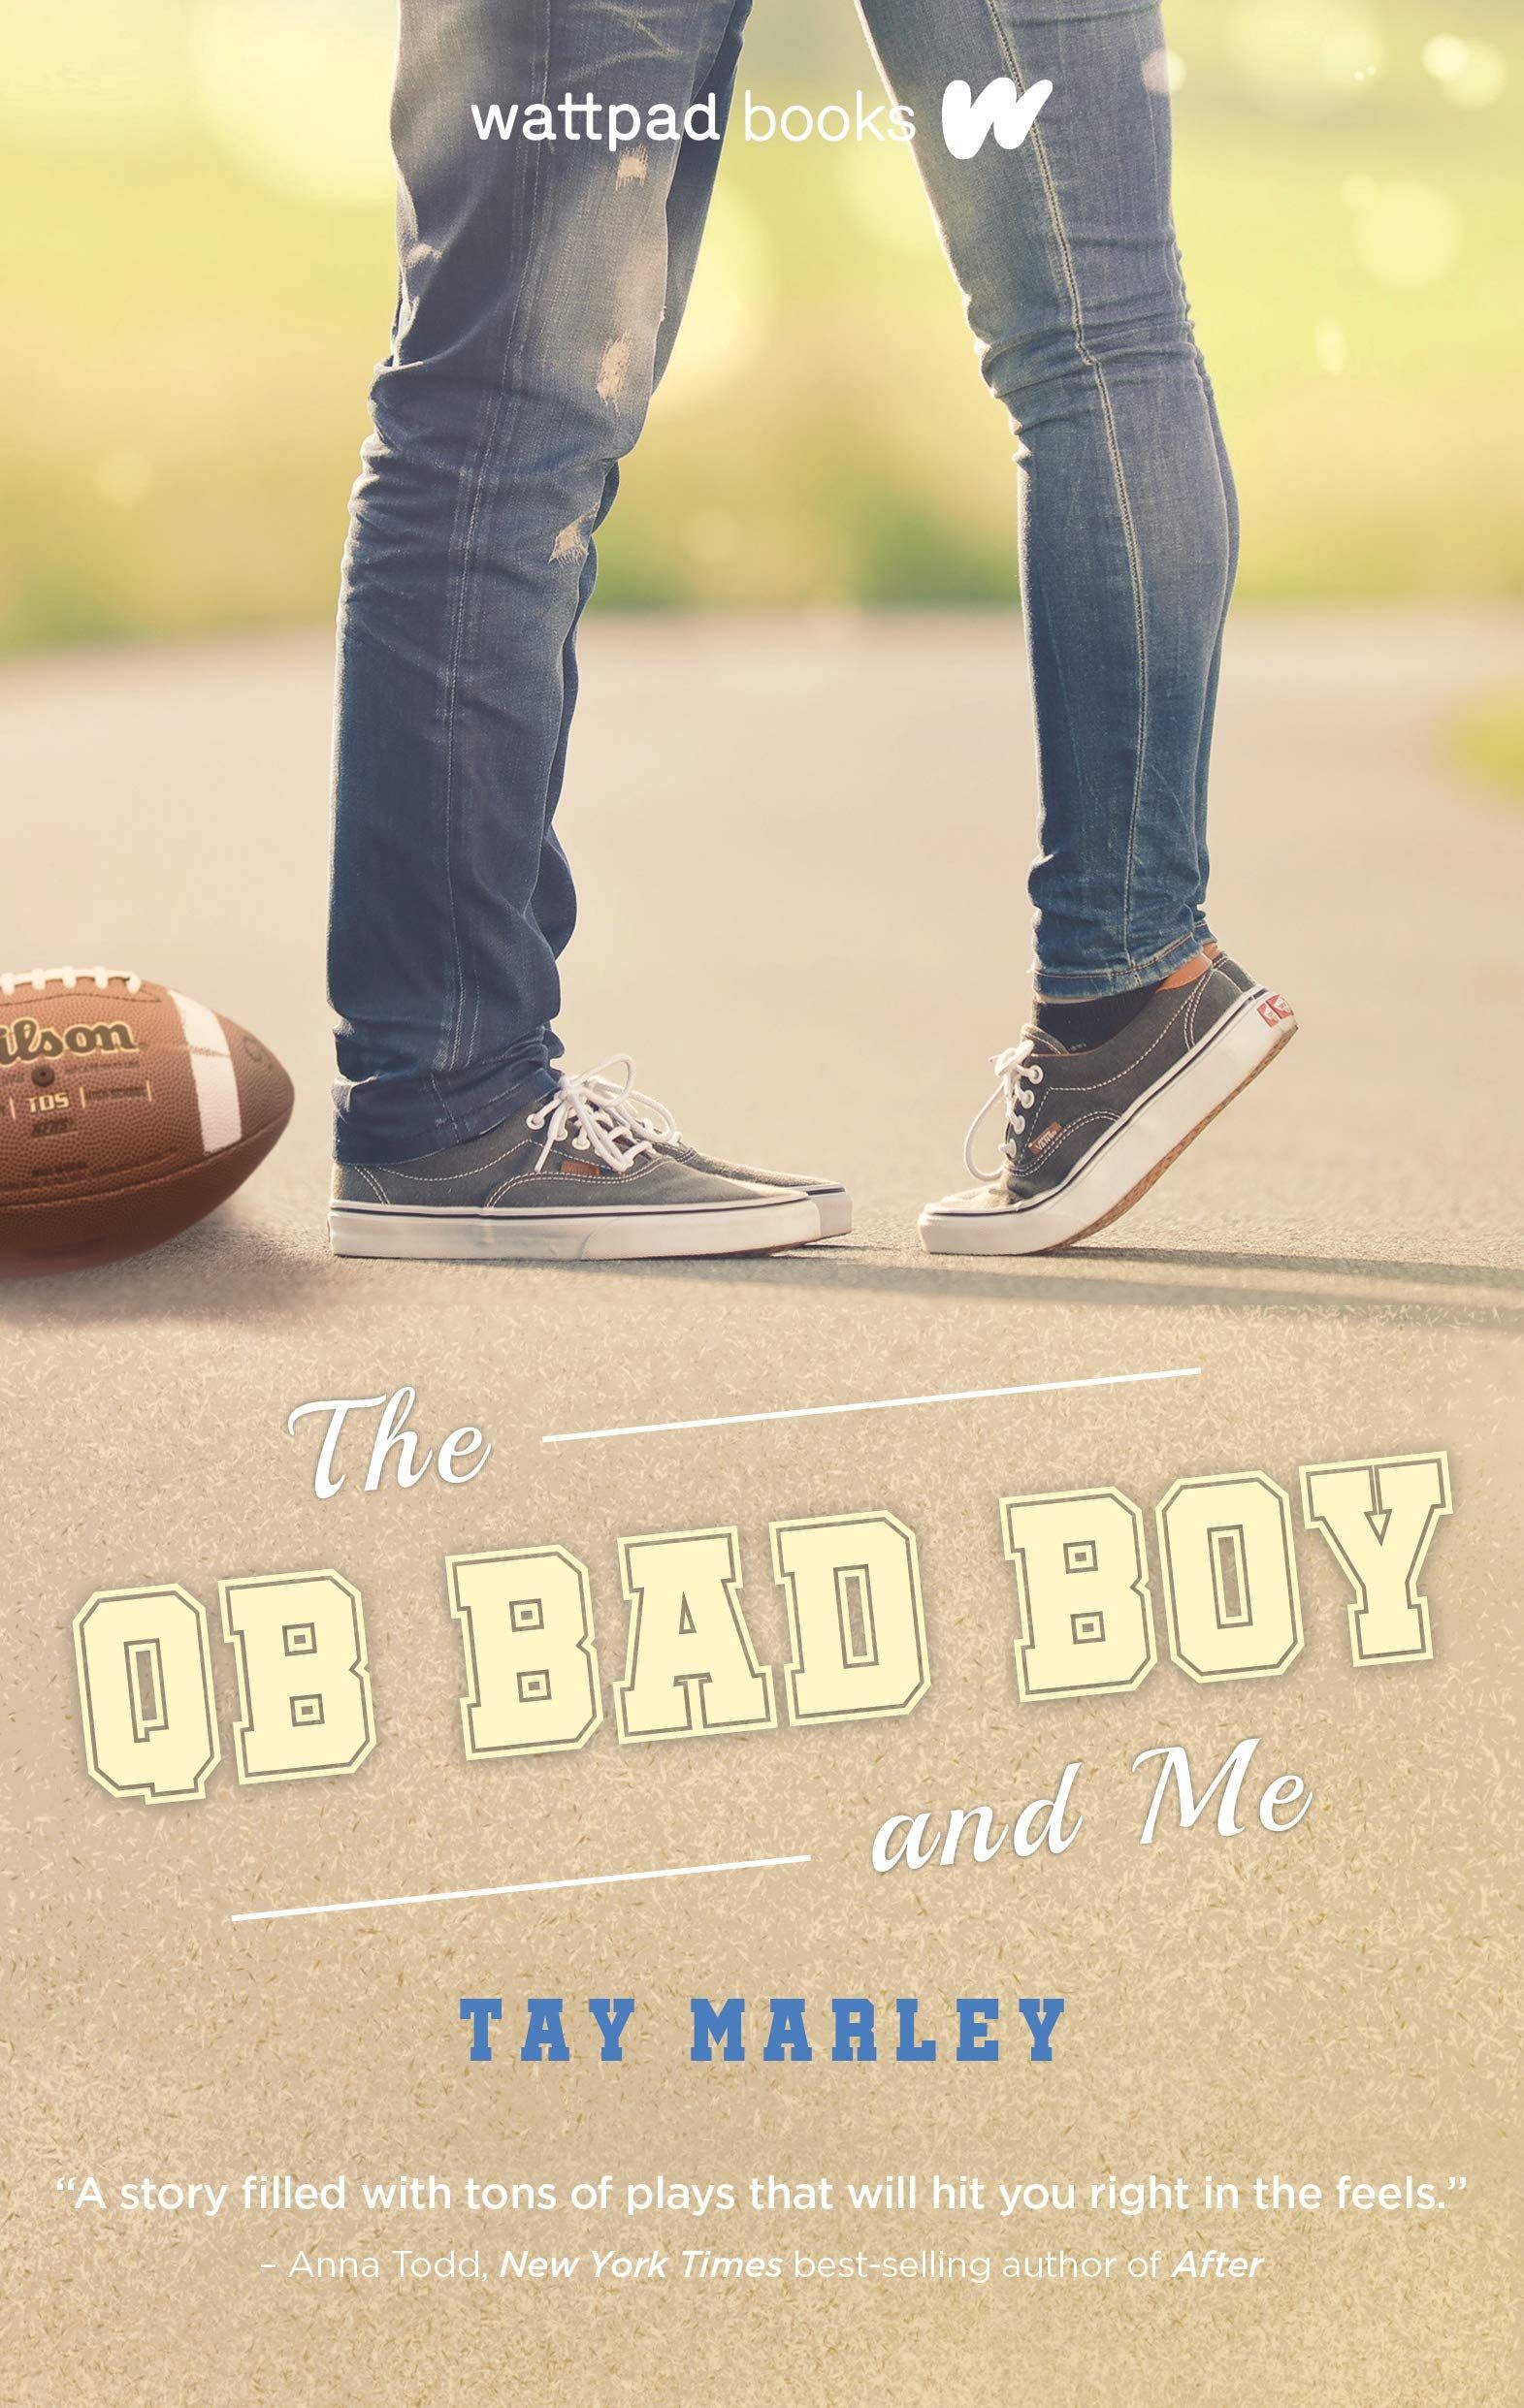 The QB Bad Boy and Me book cover